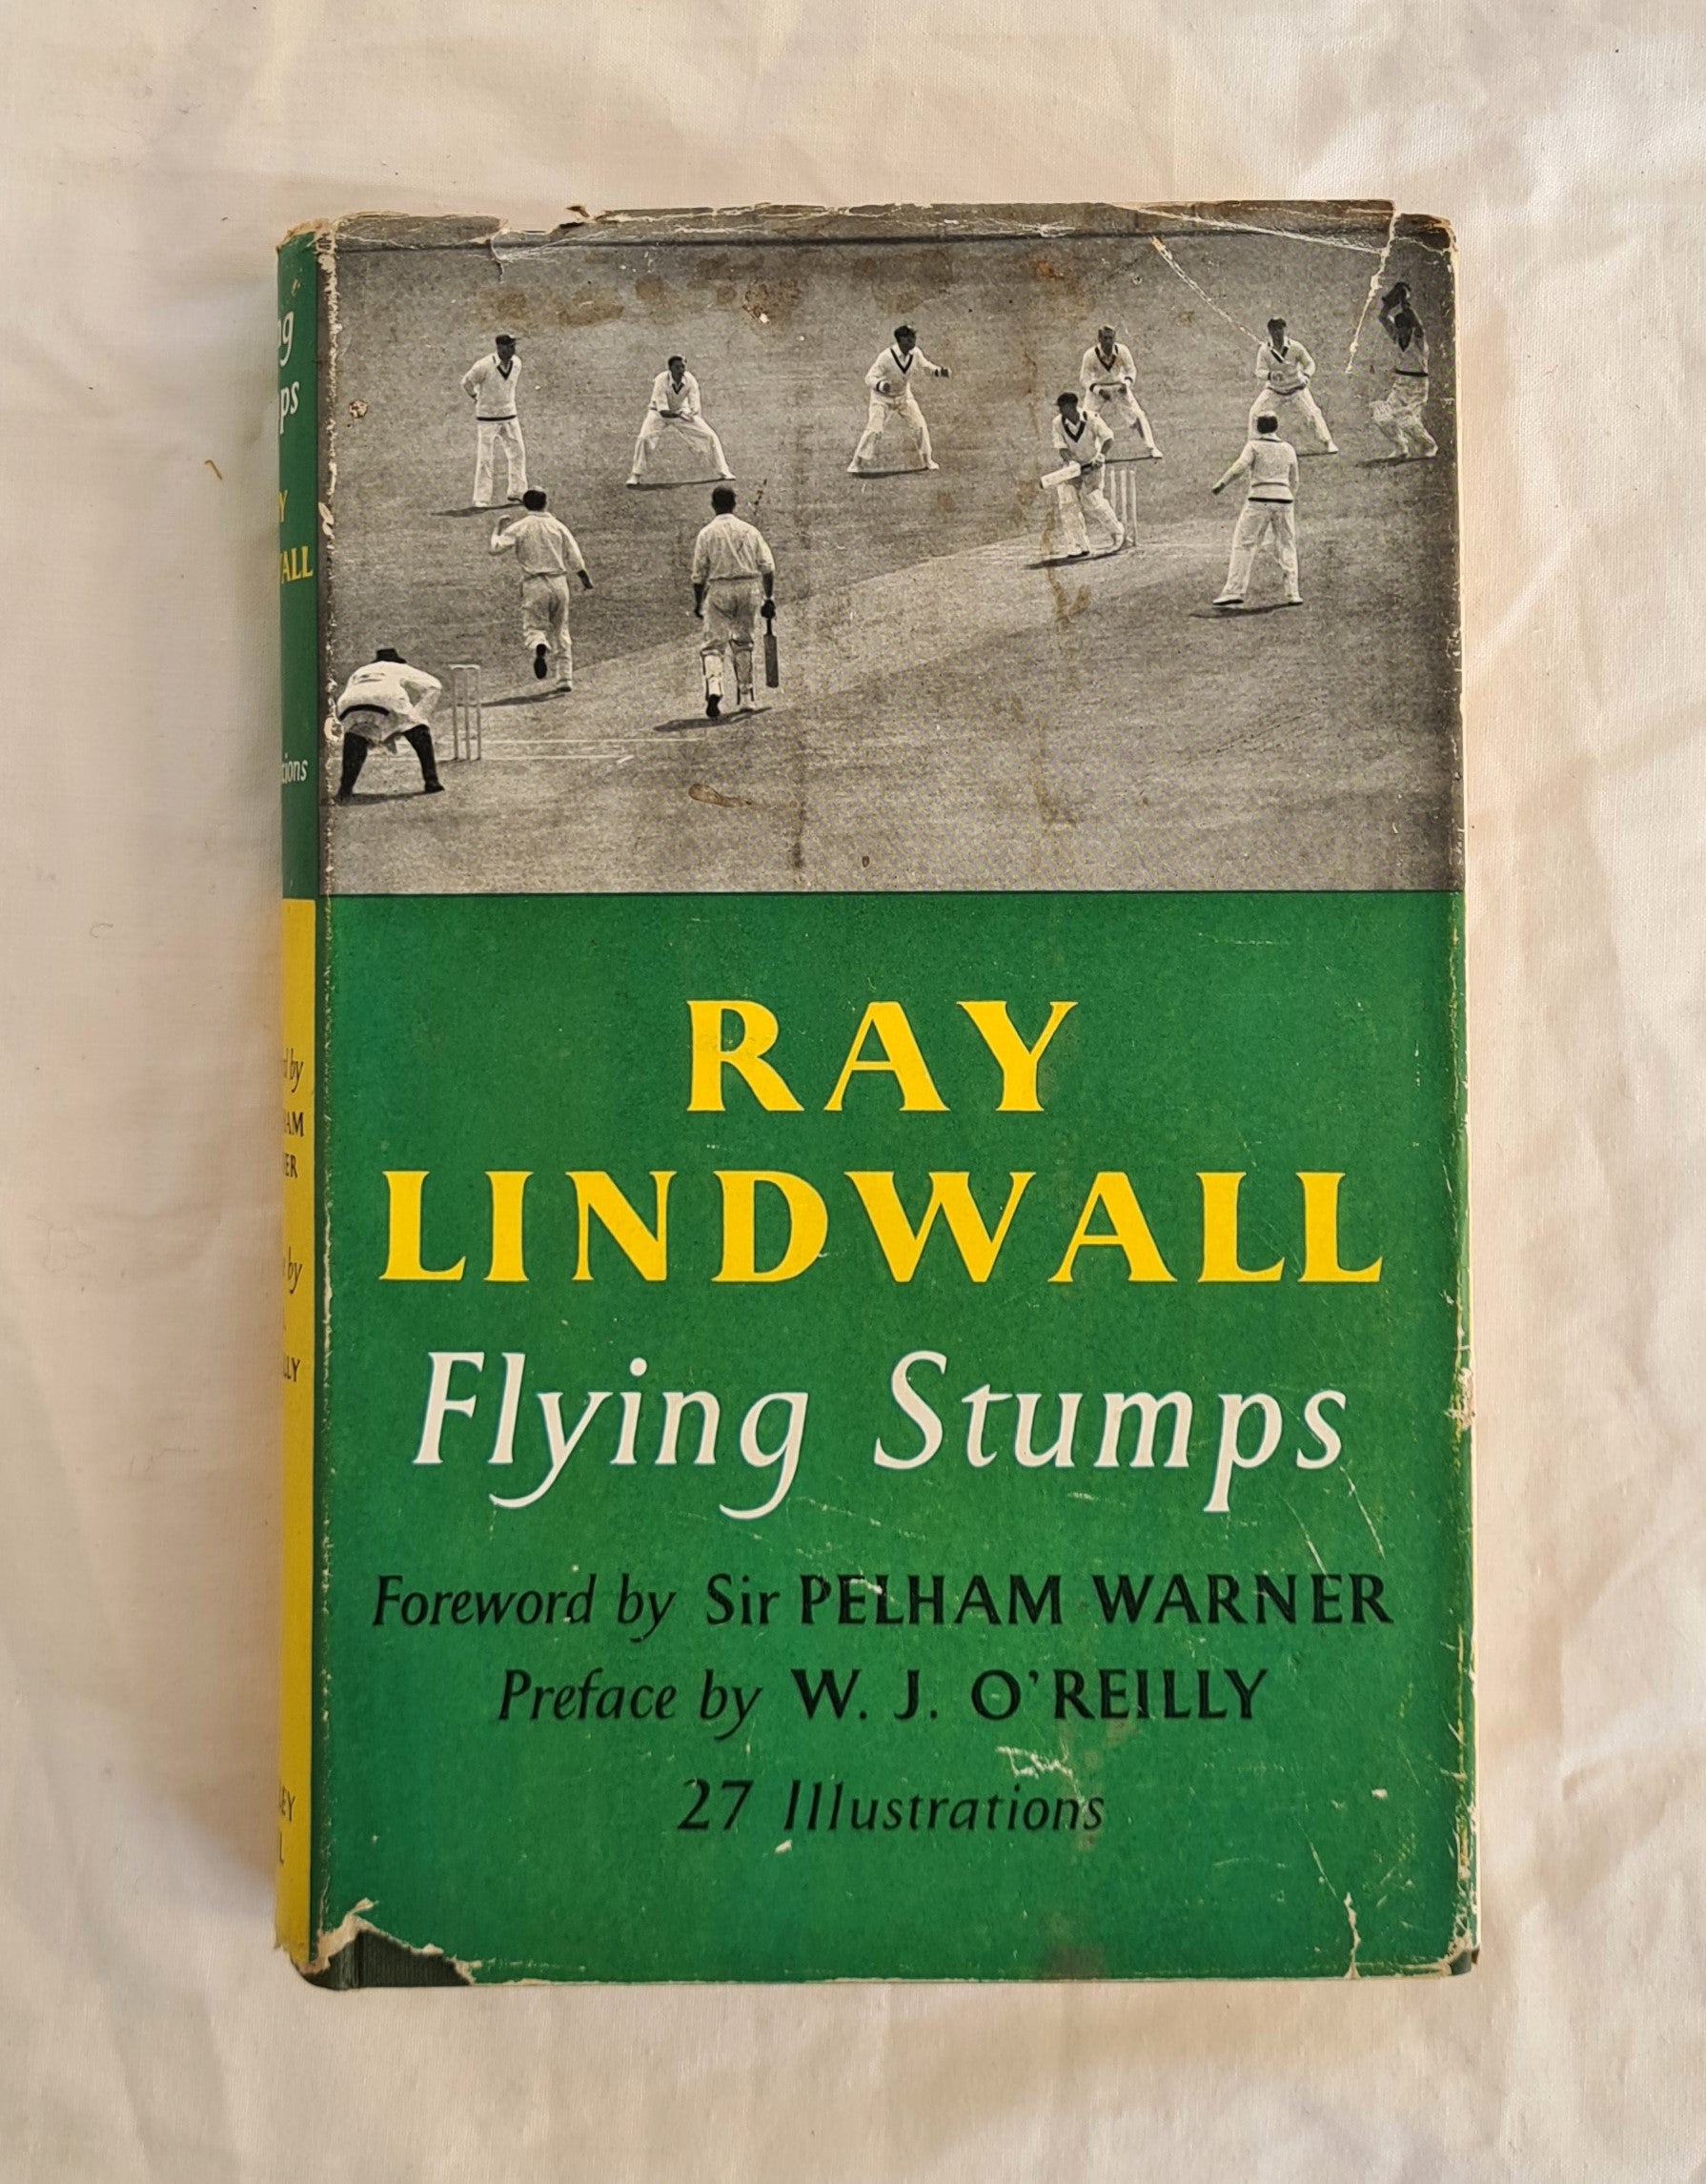 Flying Stumps by Ray Lindwall